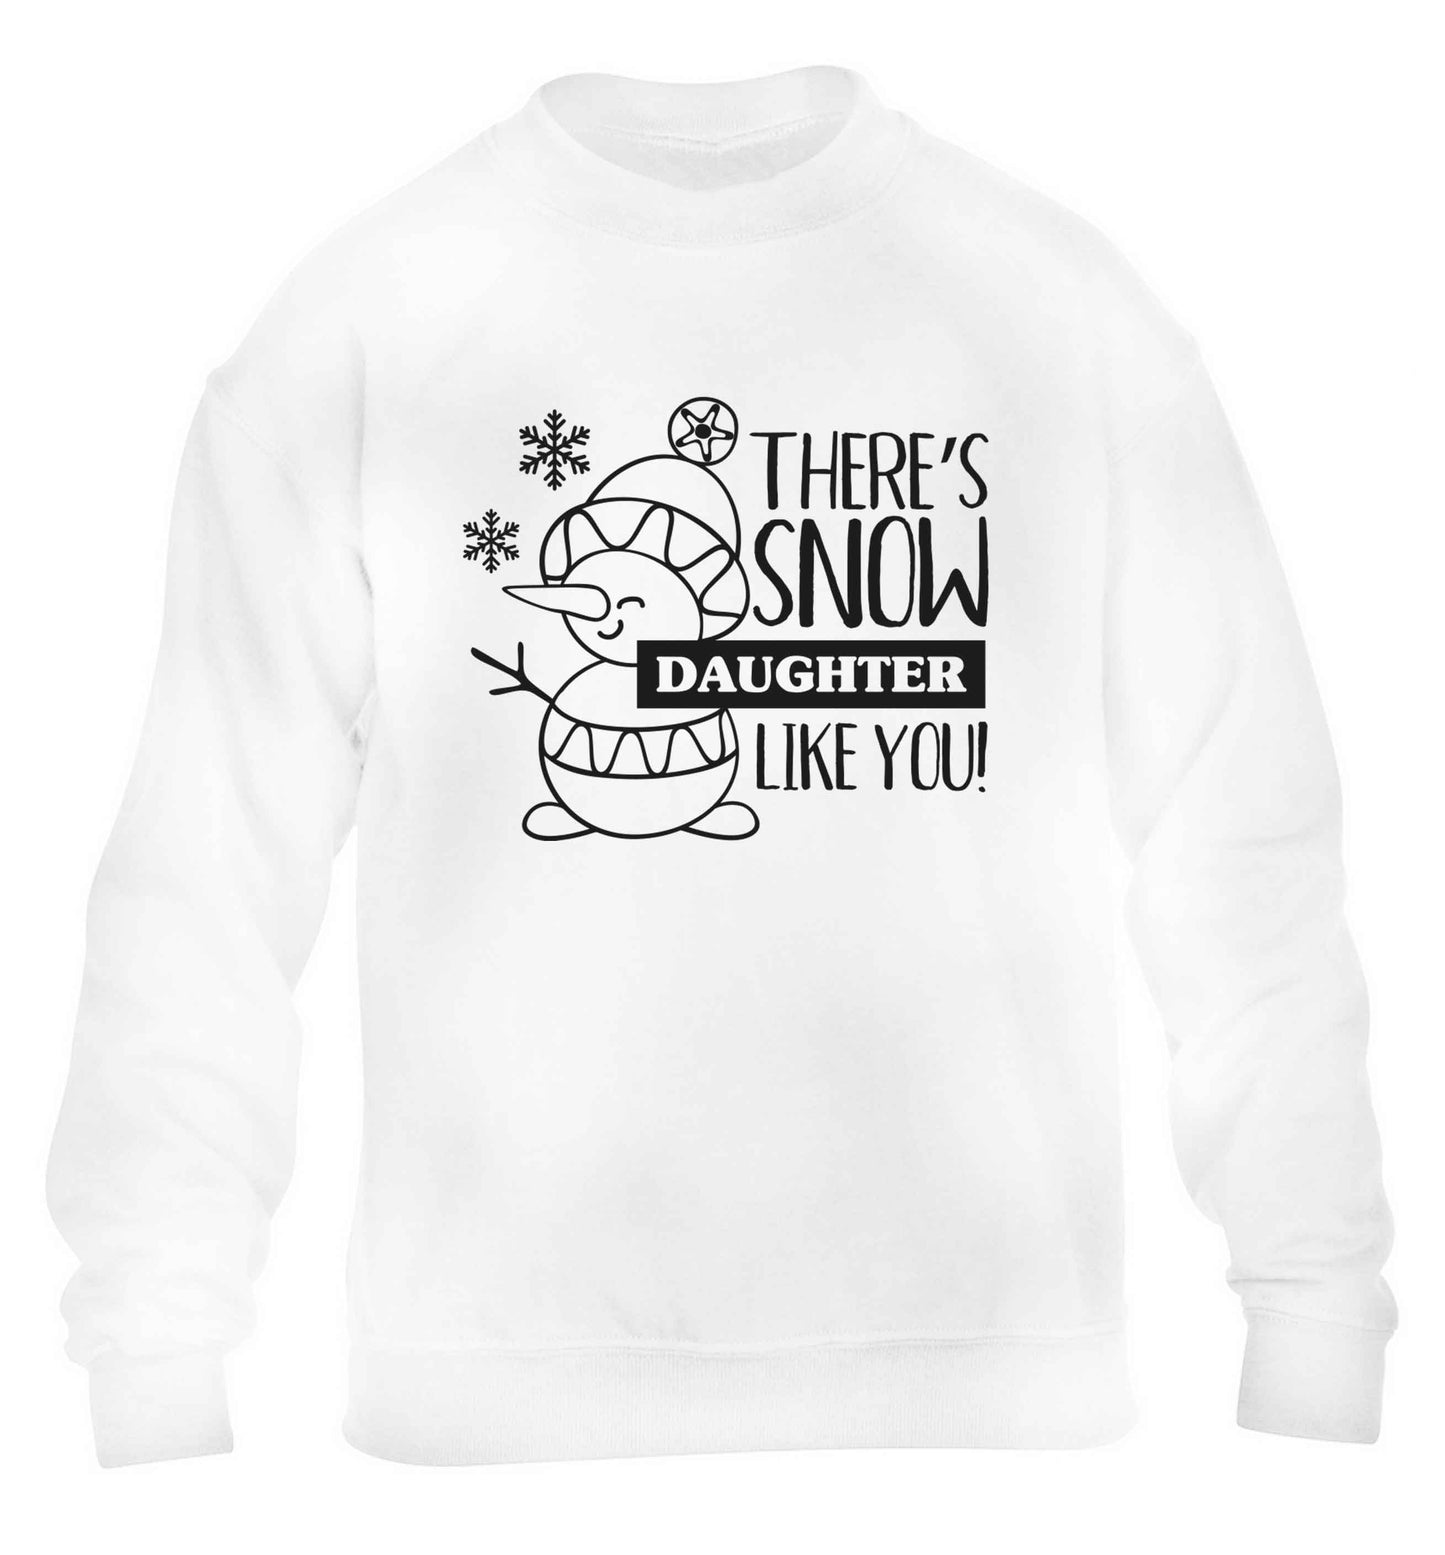 There's snow daughter like you children's white sweater 12-13 Years